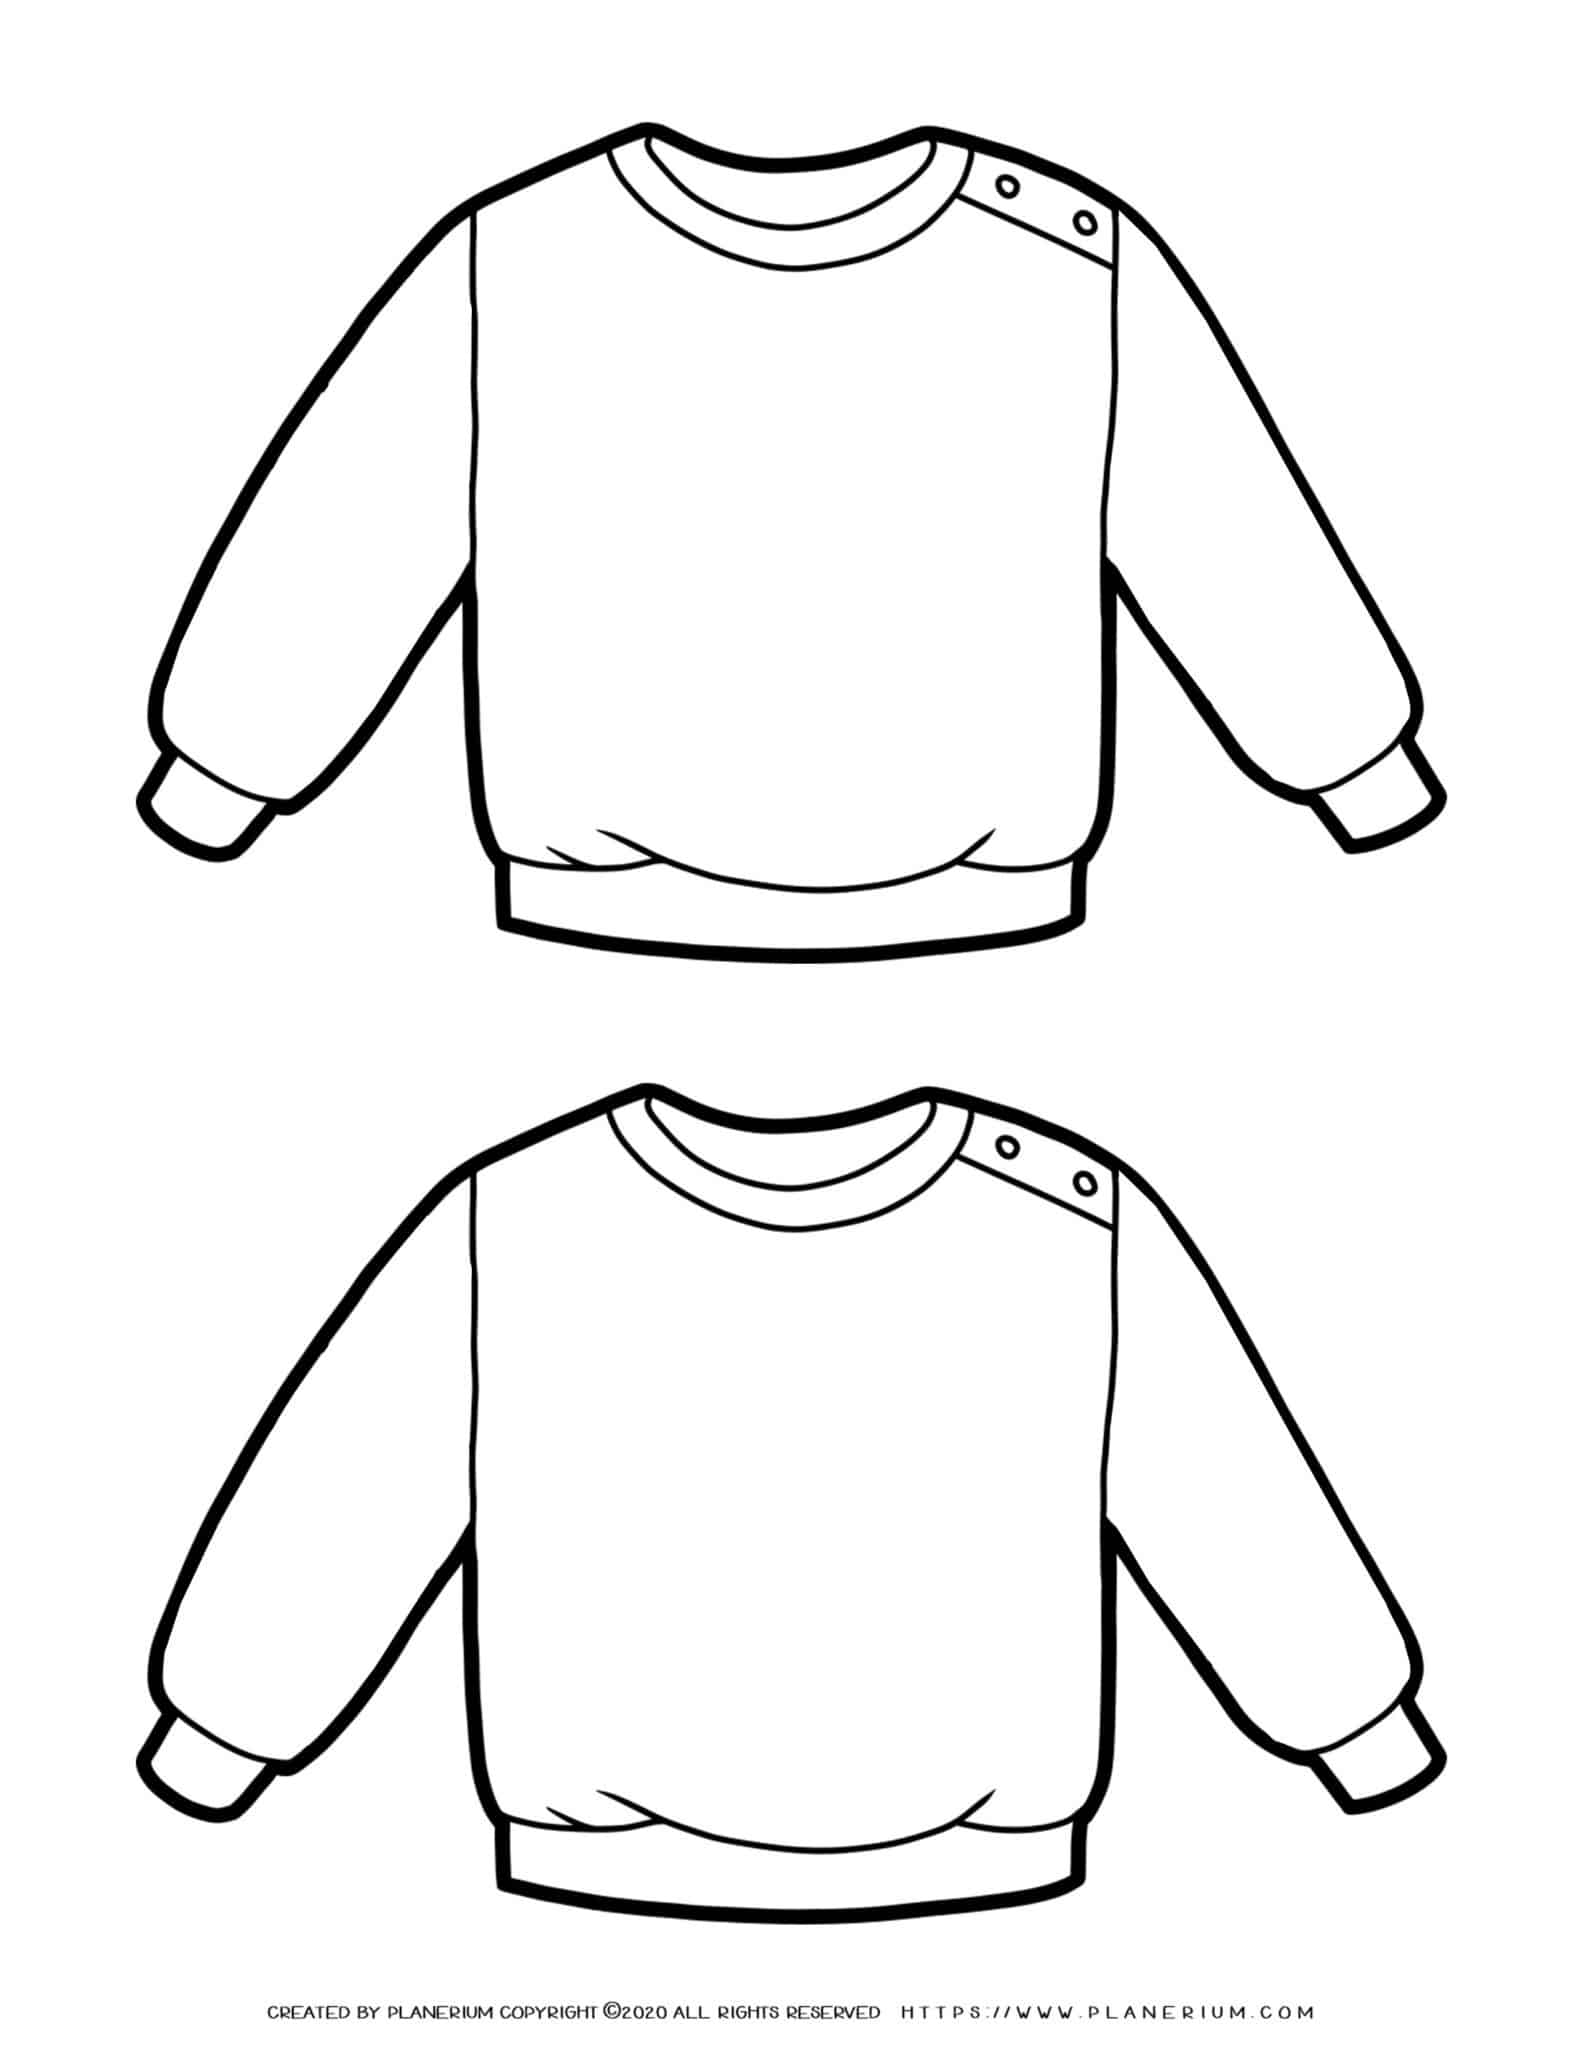 cut-out-free-printable-sweater-template-next-set-up-an-ugly-sweater-craft-table